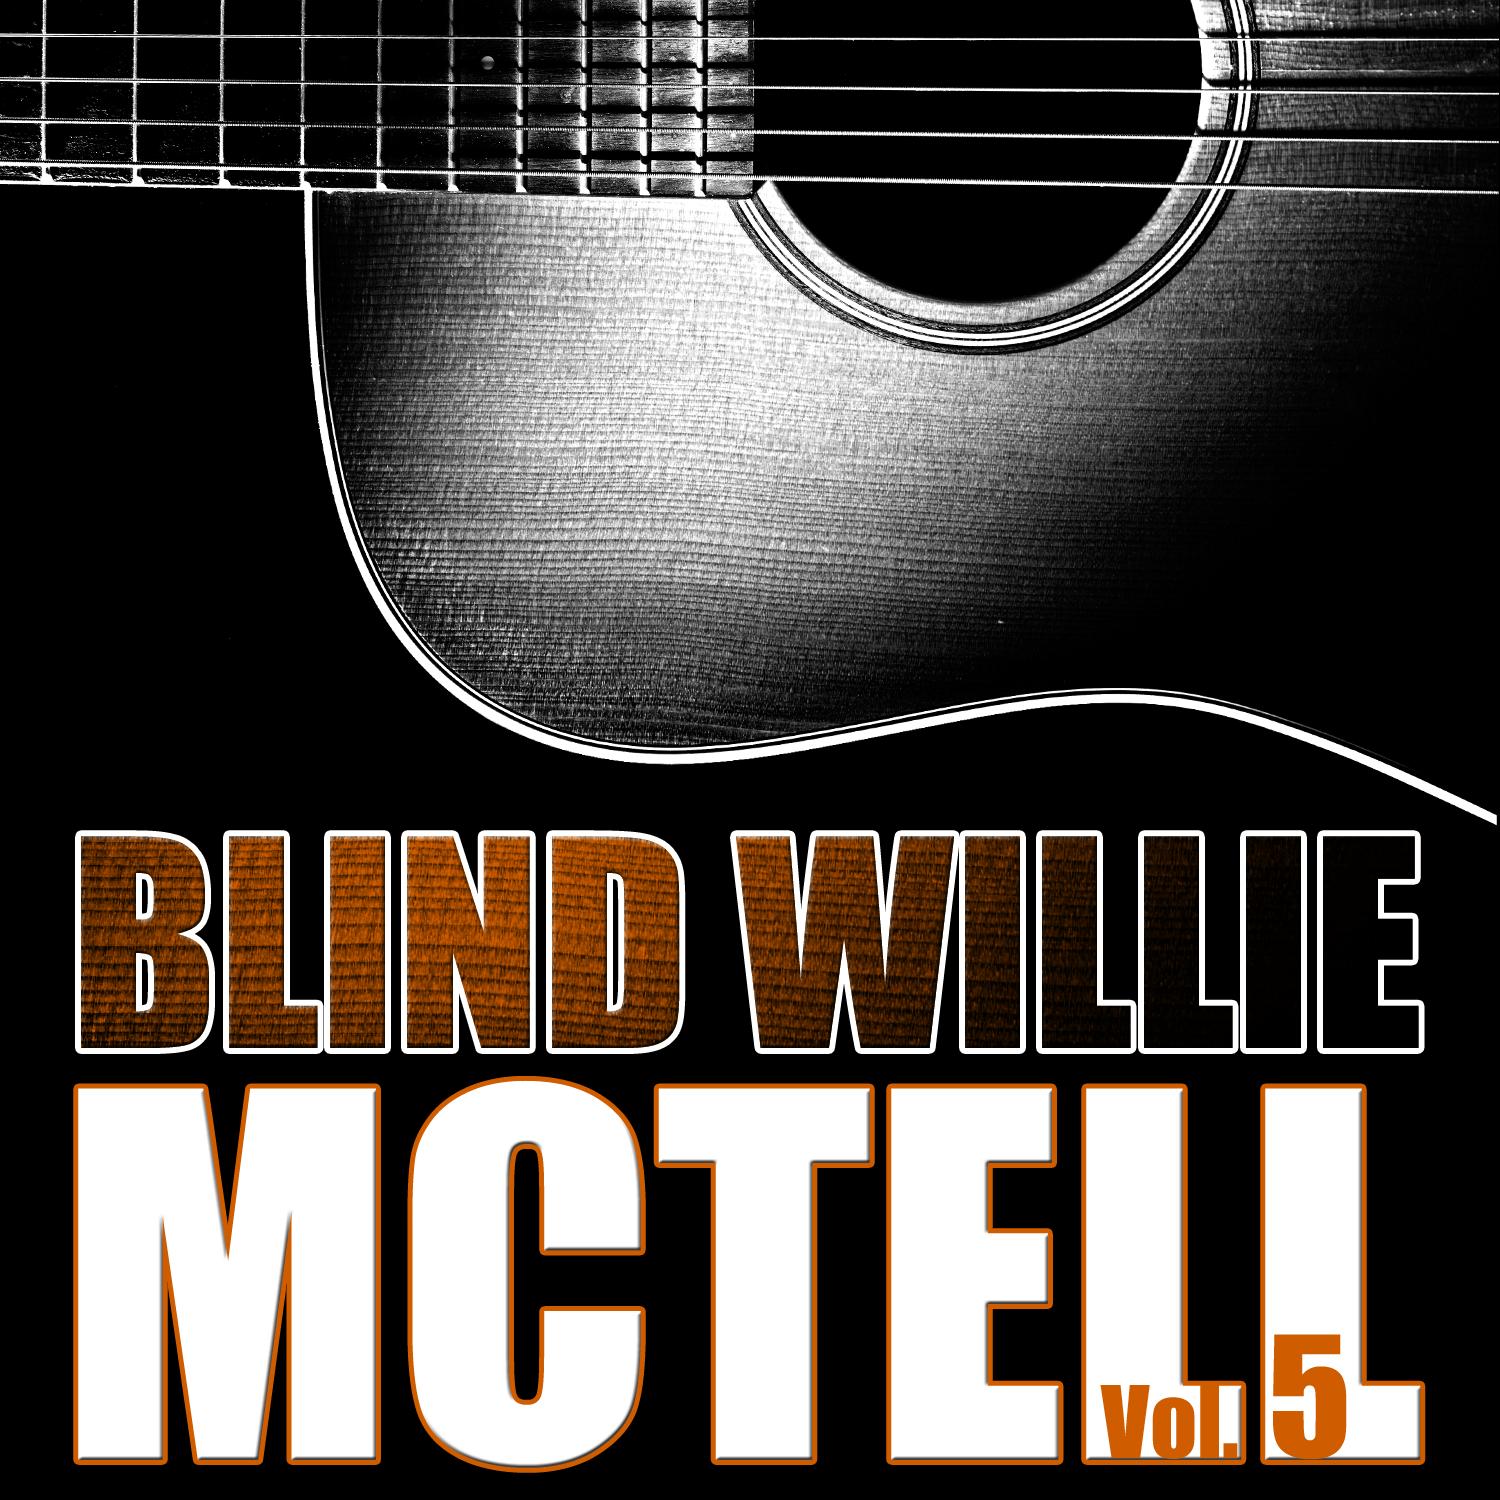 Blind Willie Mctell, Vol. 5